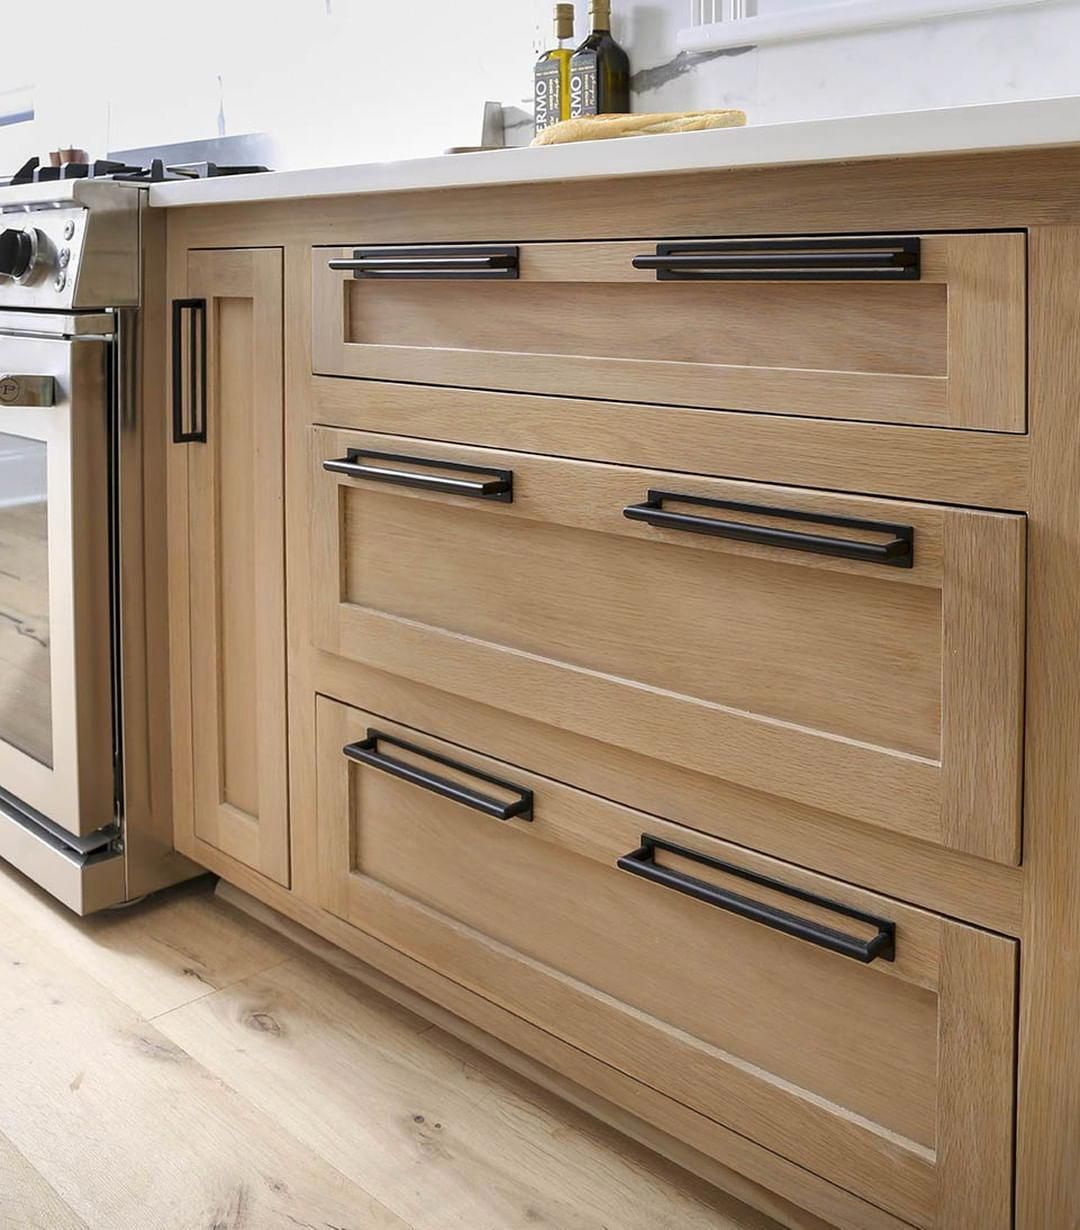 Wood Kitchen Cabinets With Handles